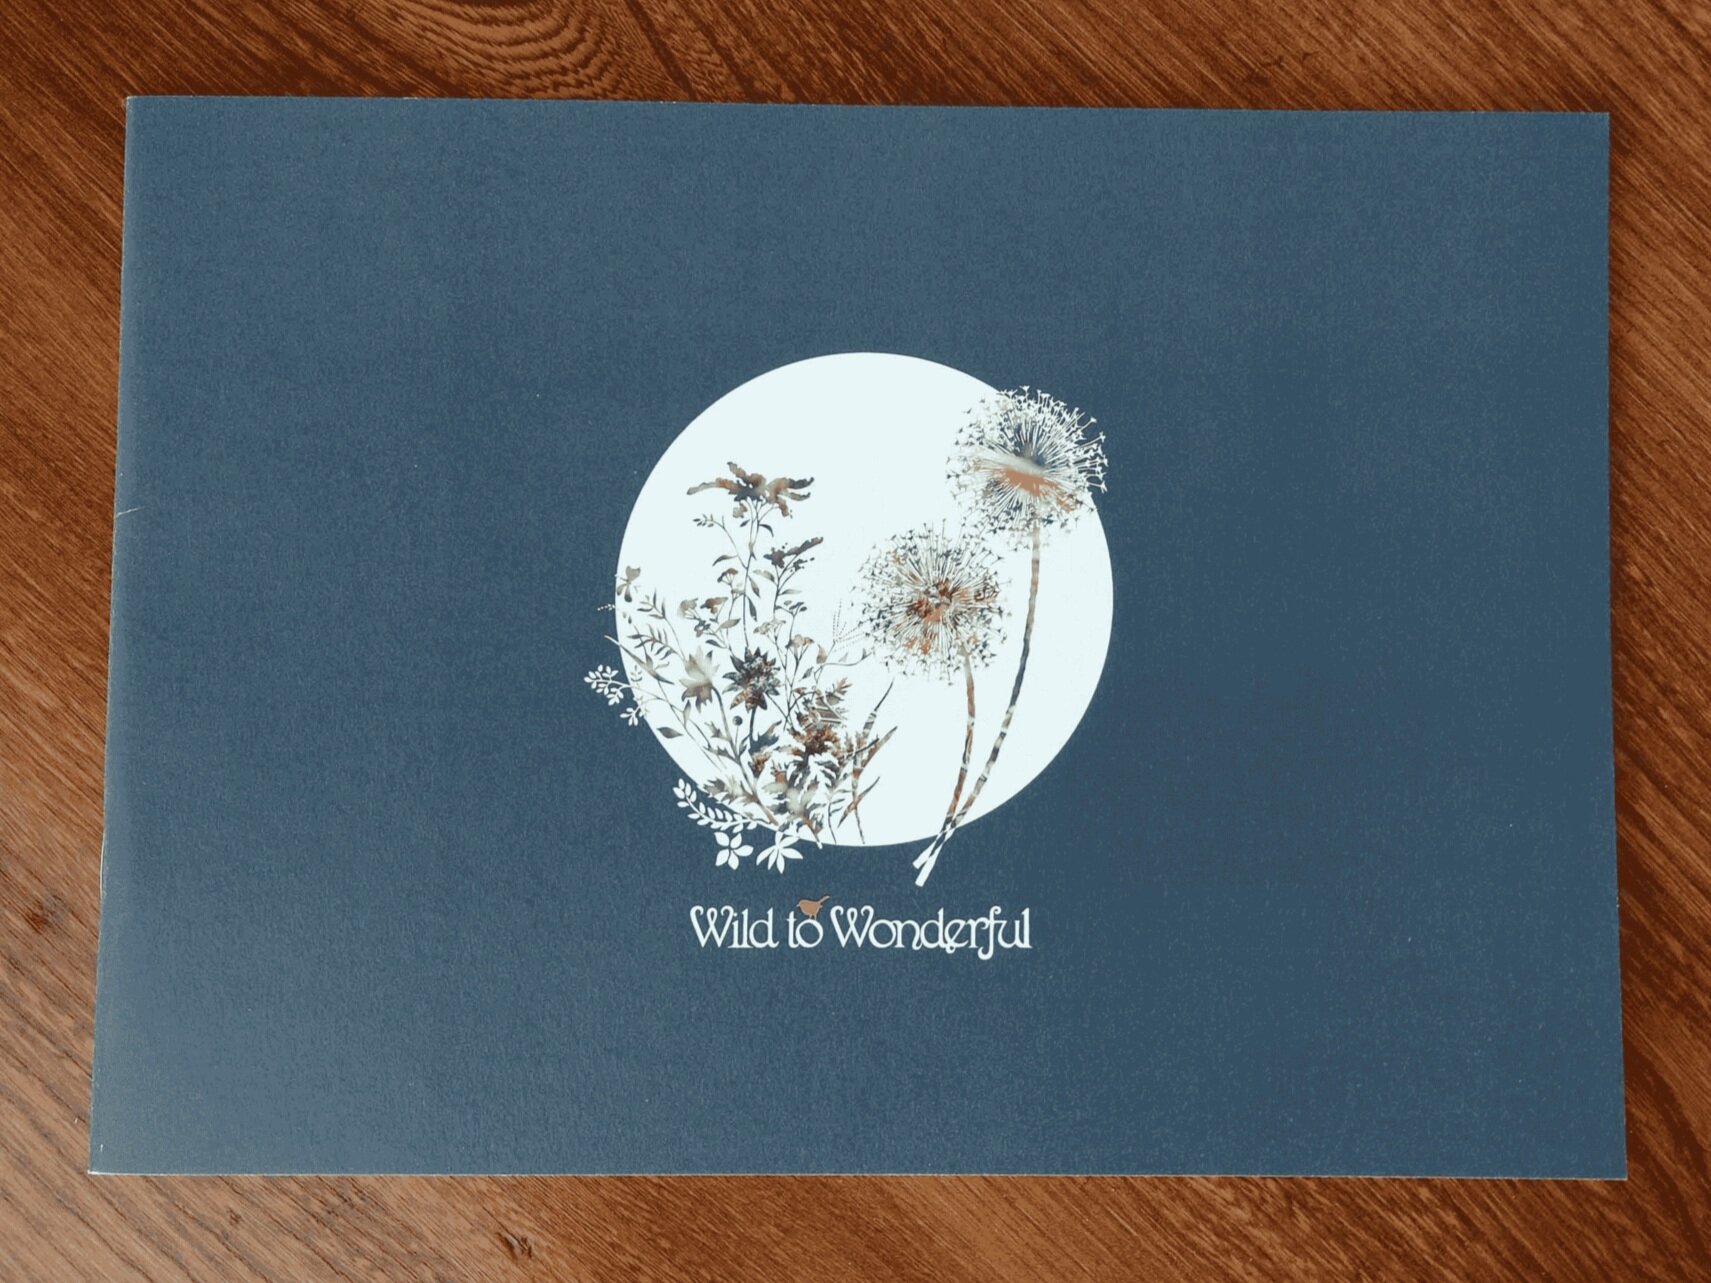 Wild to Wonderful - brochure front cover